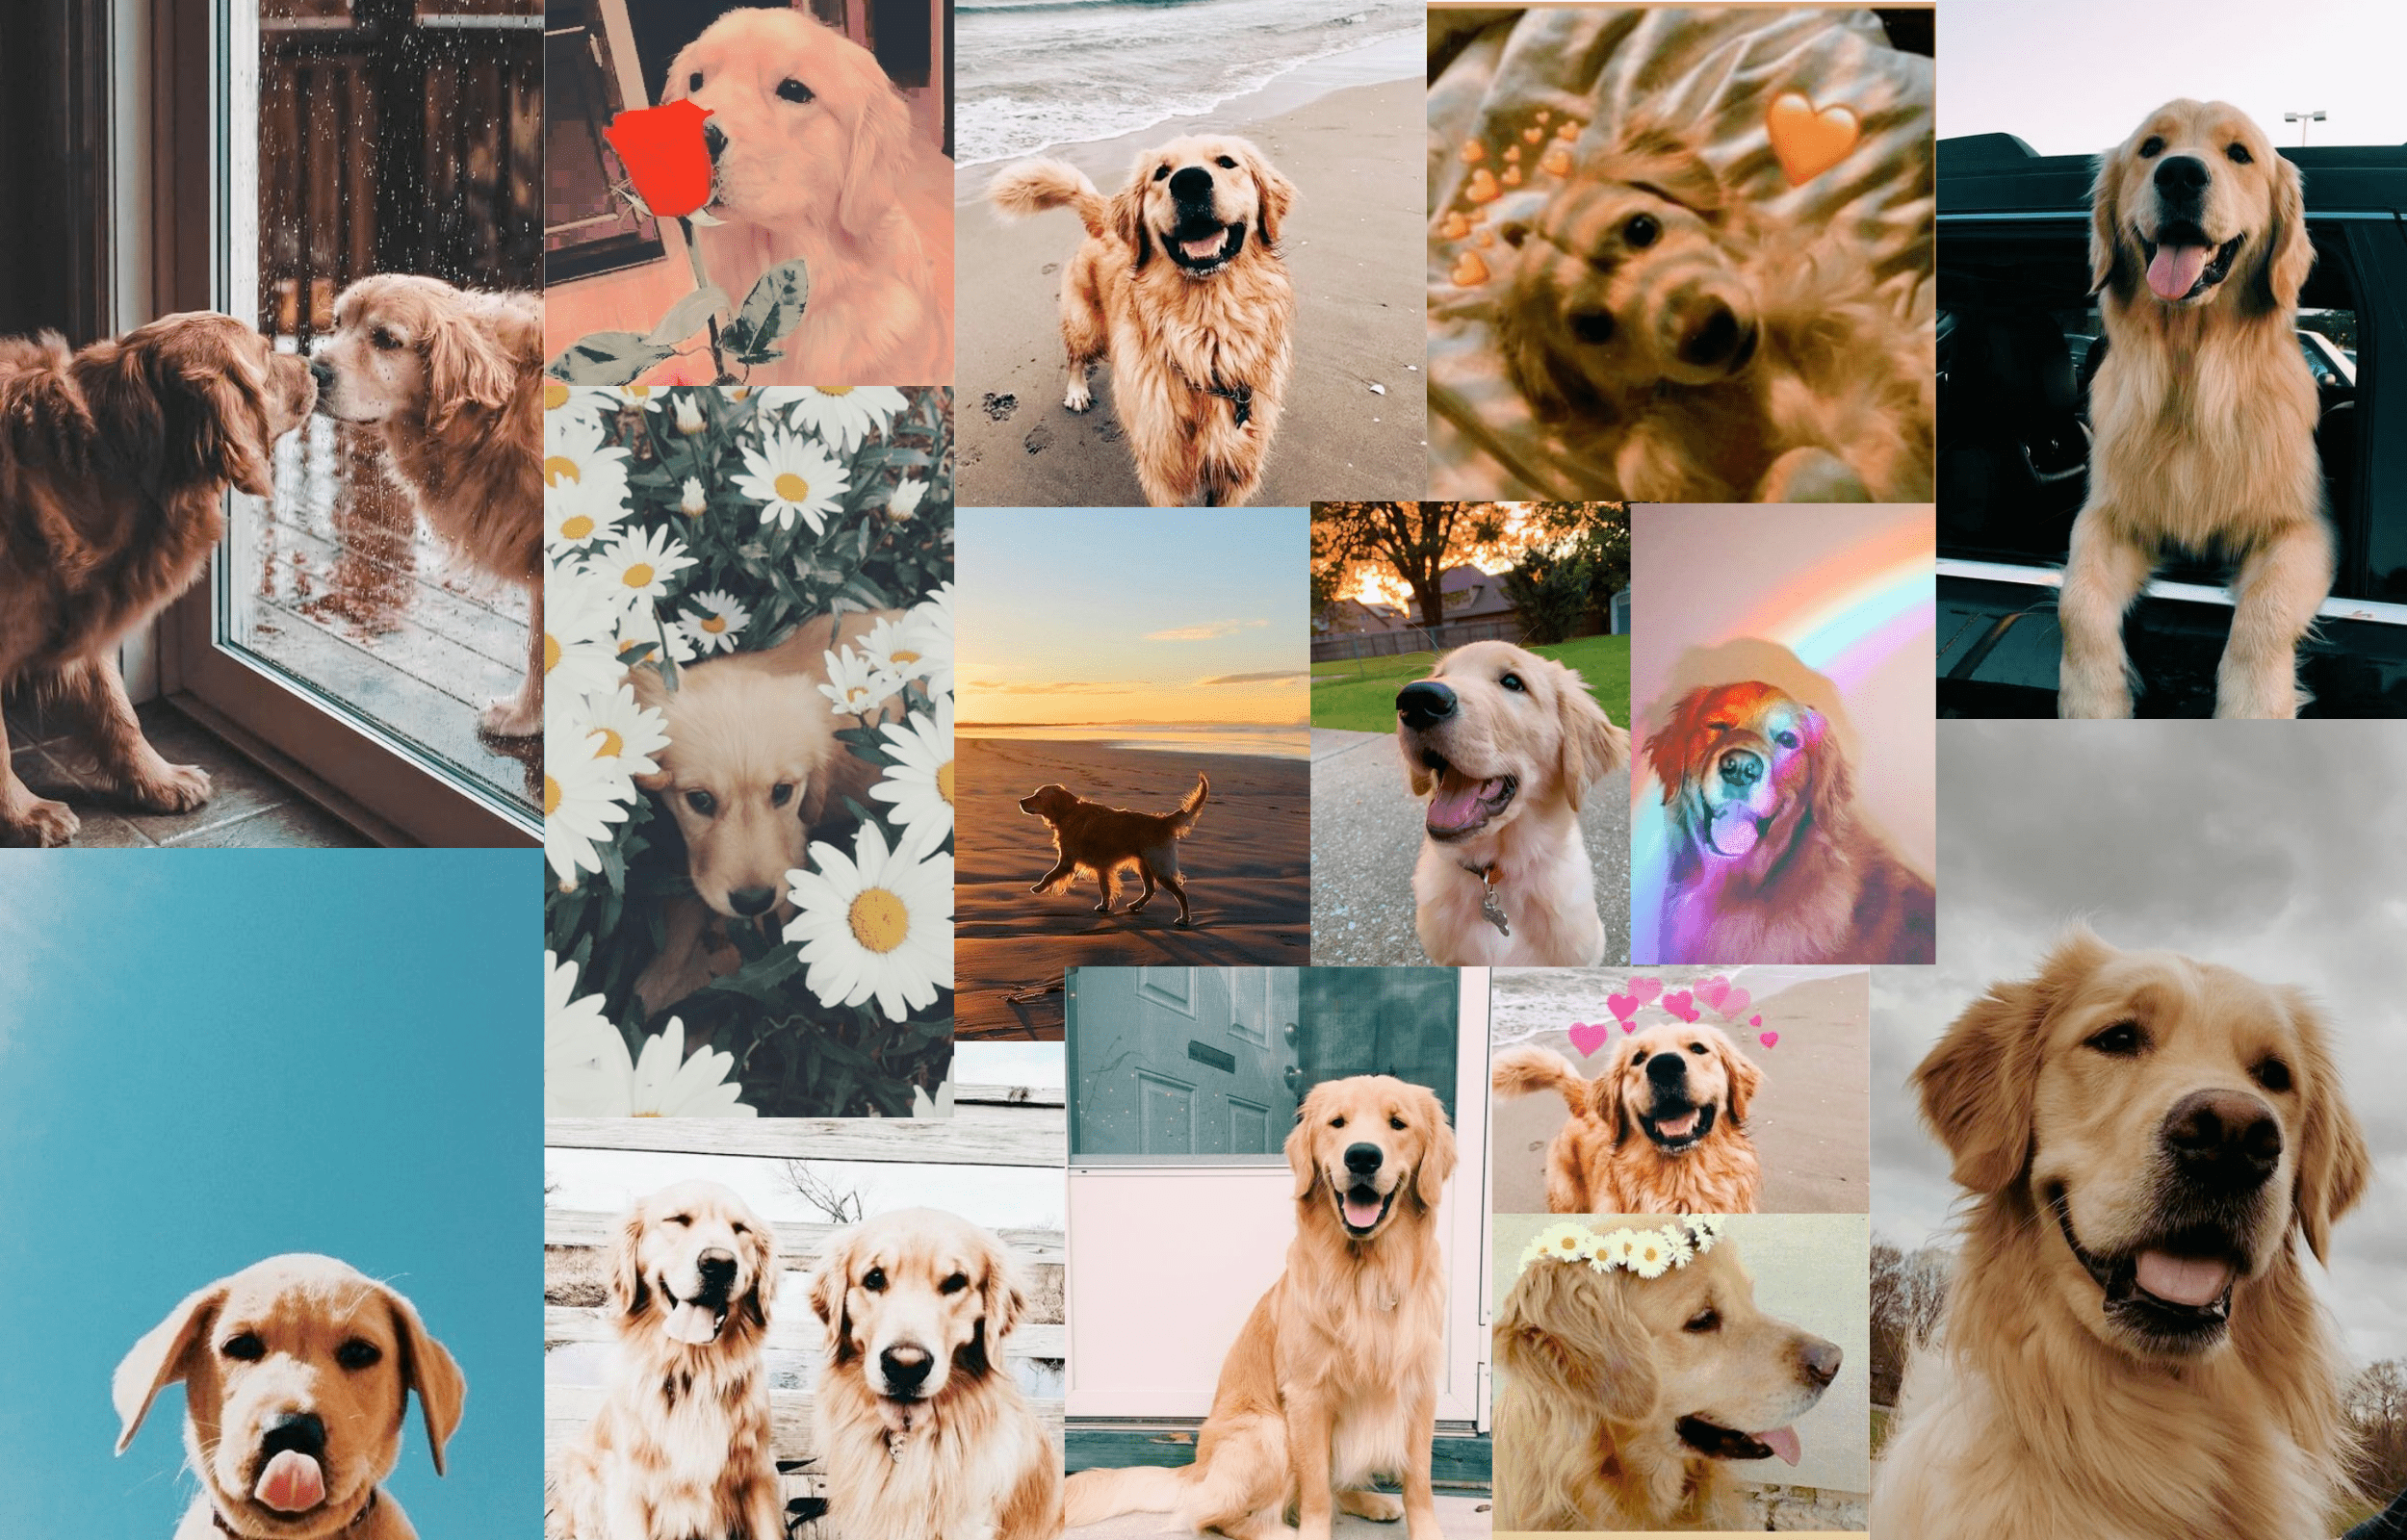 Aesthetic Dog Collage. Dog wallpaper, Cute puppy wallpaper, Puppy wallpaper